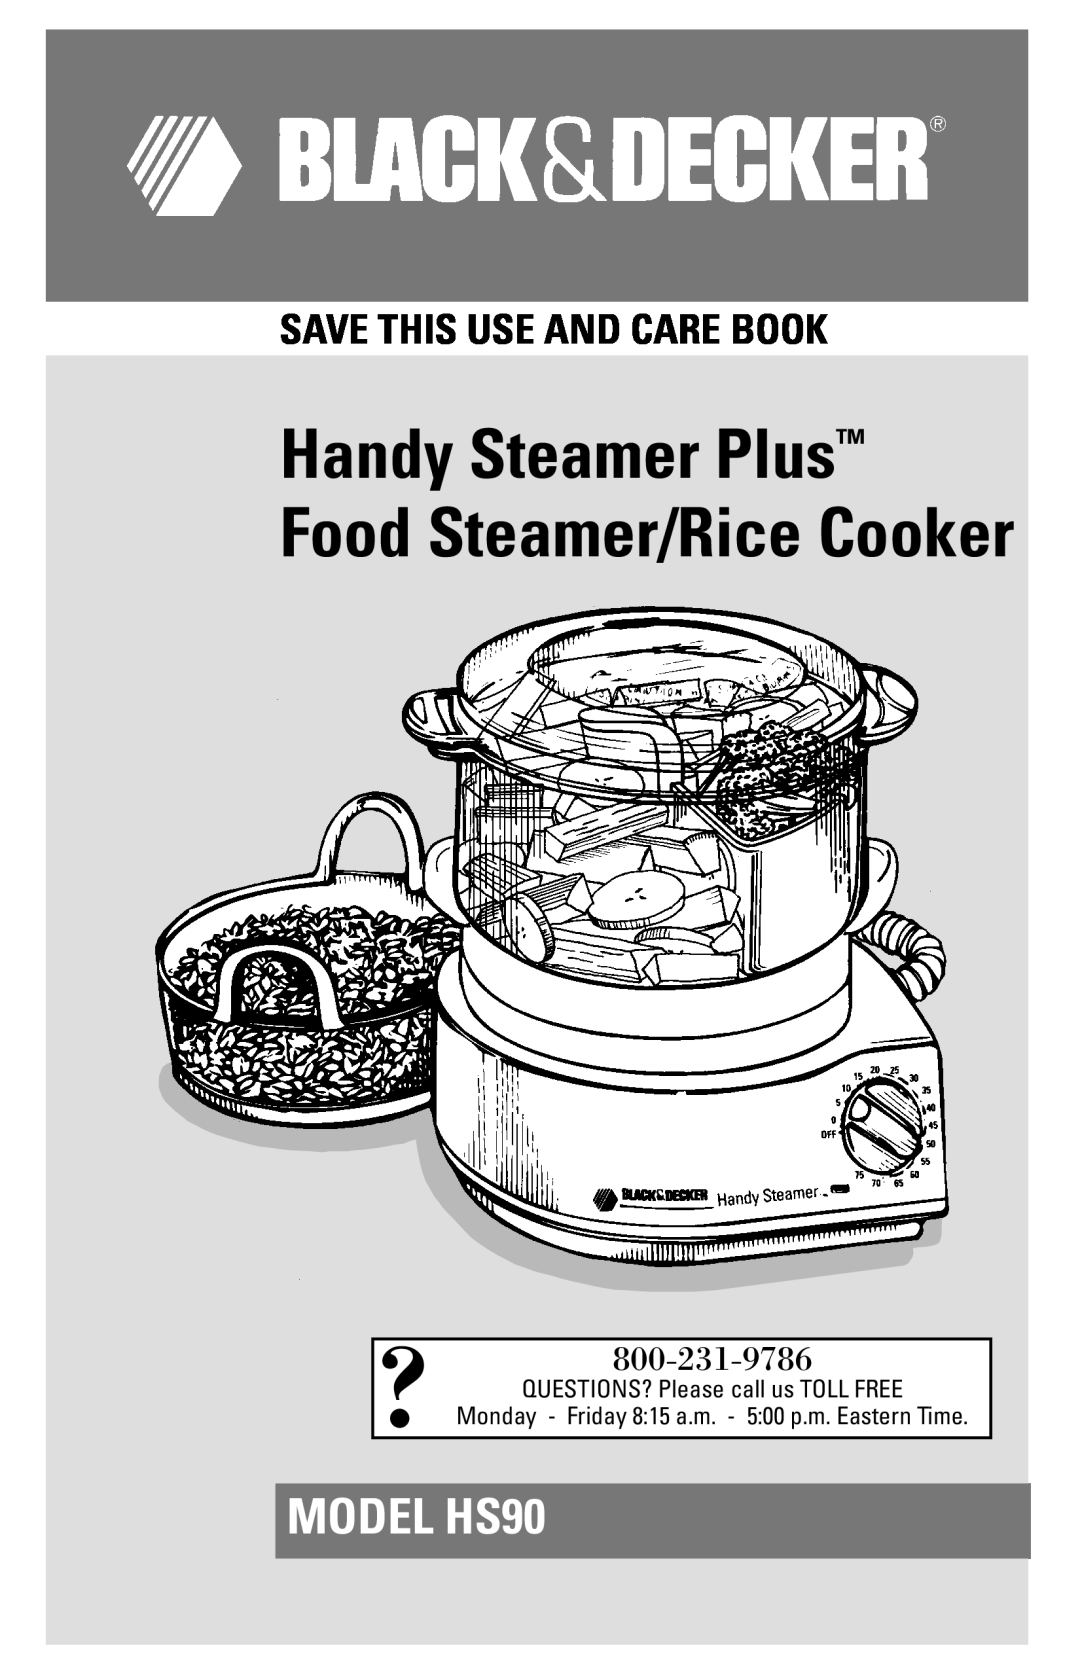 Black & Decker manual MODEL HS90, Handy Steamer Plus Food Steamer/Rice Cooker, Save This Use And Care Book 